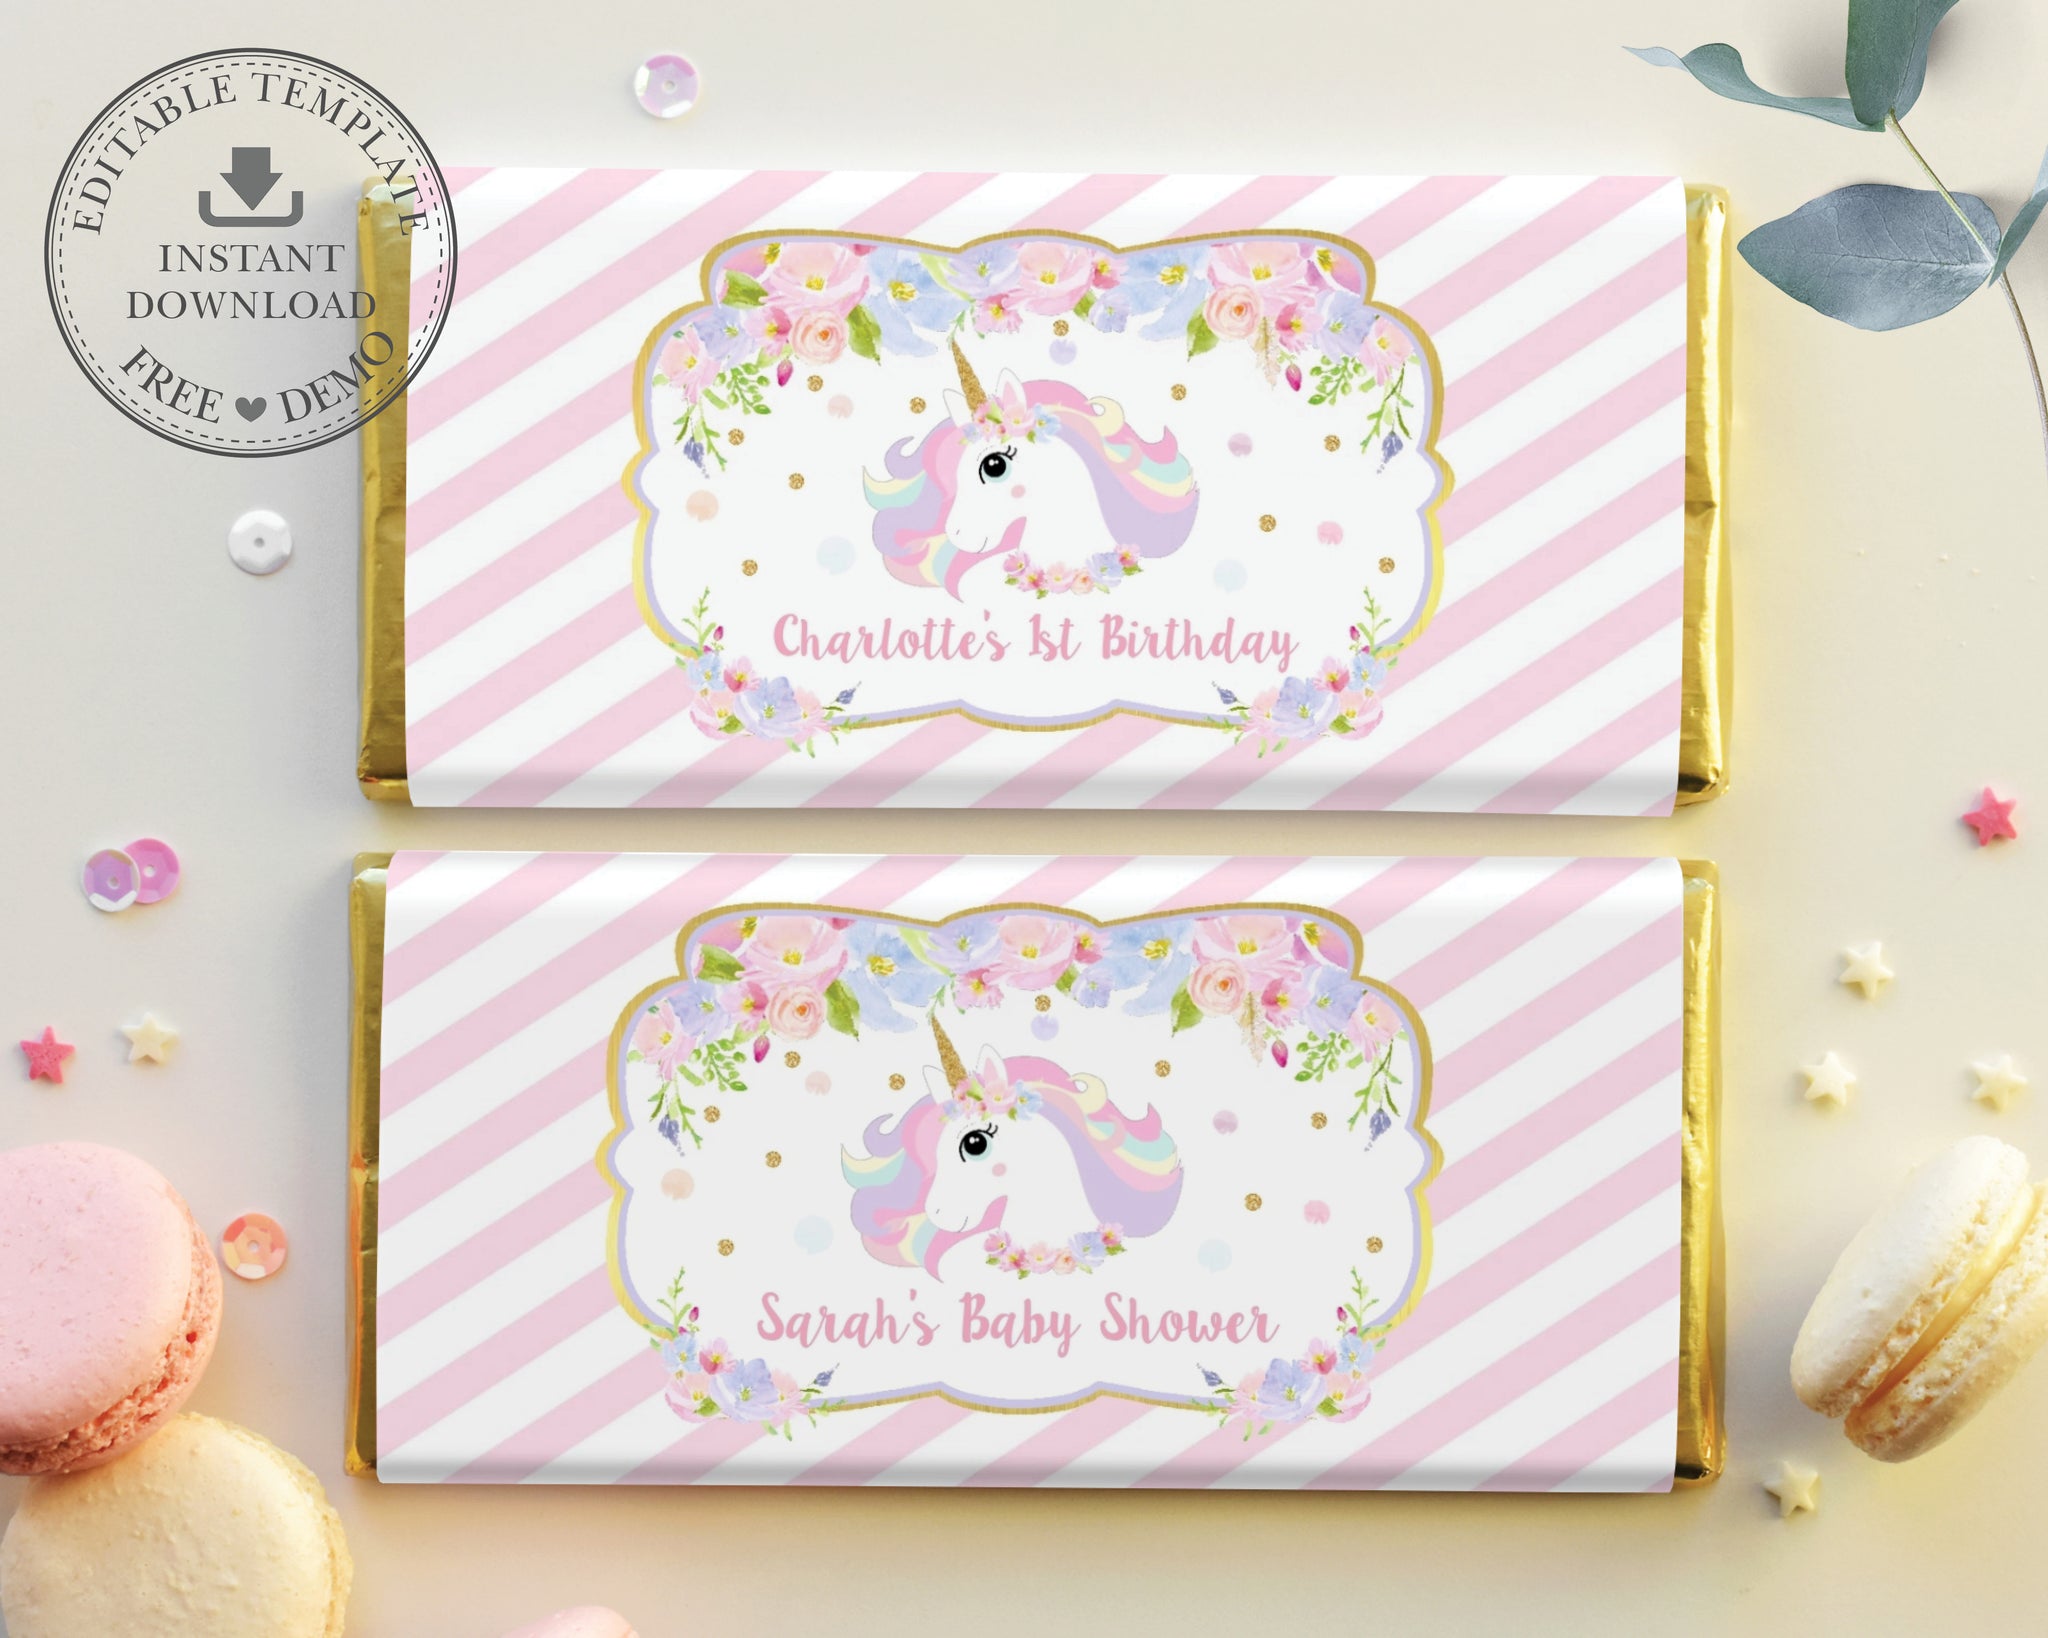 Unicorn Party Favors - Printable Candy Wrappers